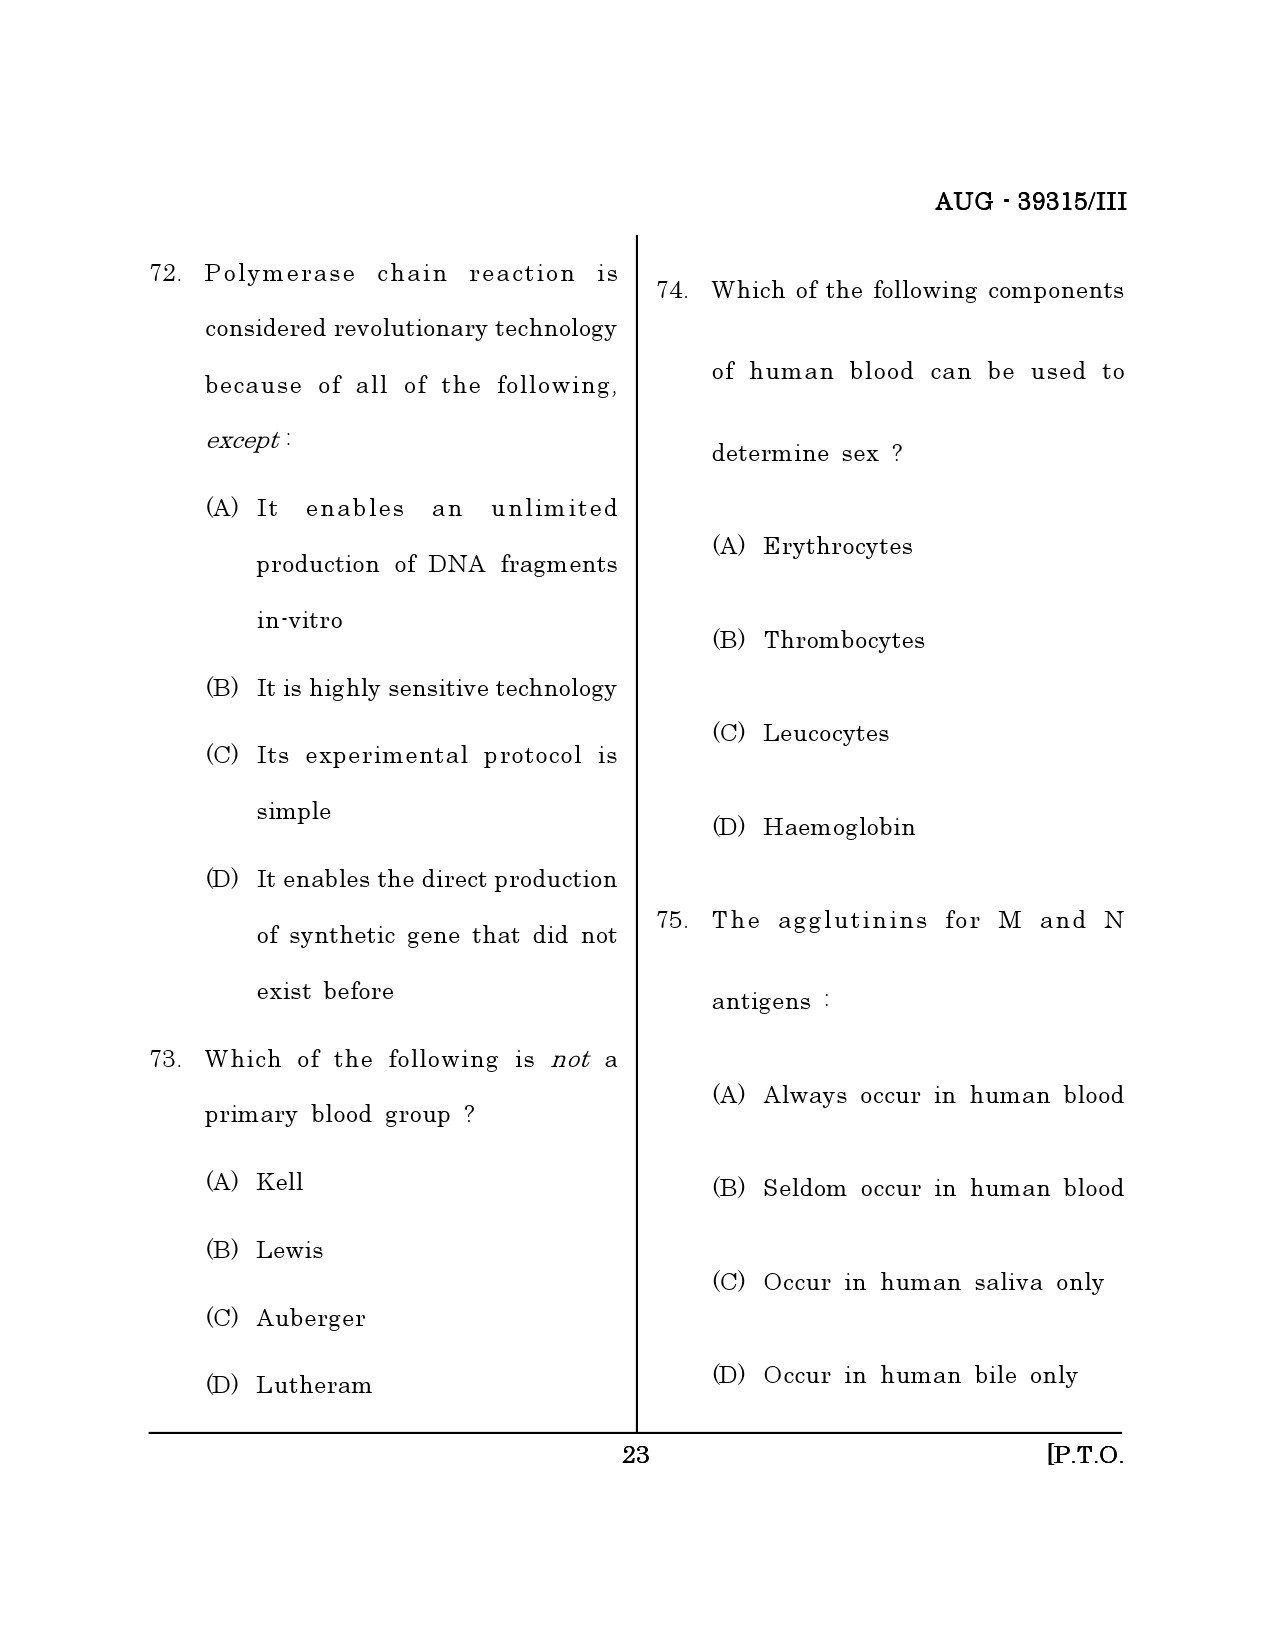 Maharashtra SET Forensic Science Question Paper III August 2015 22